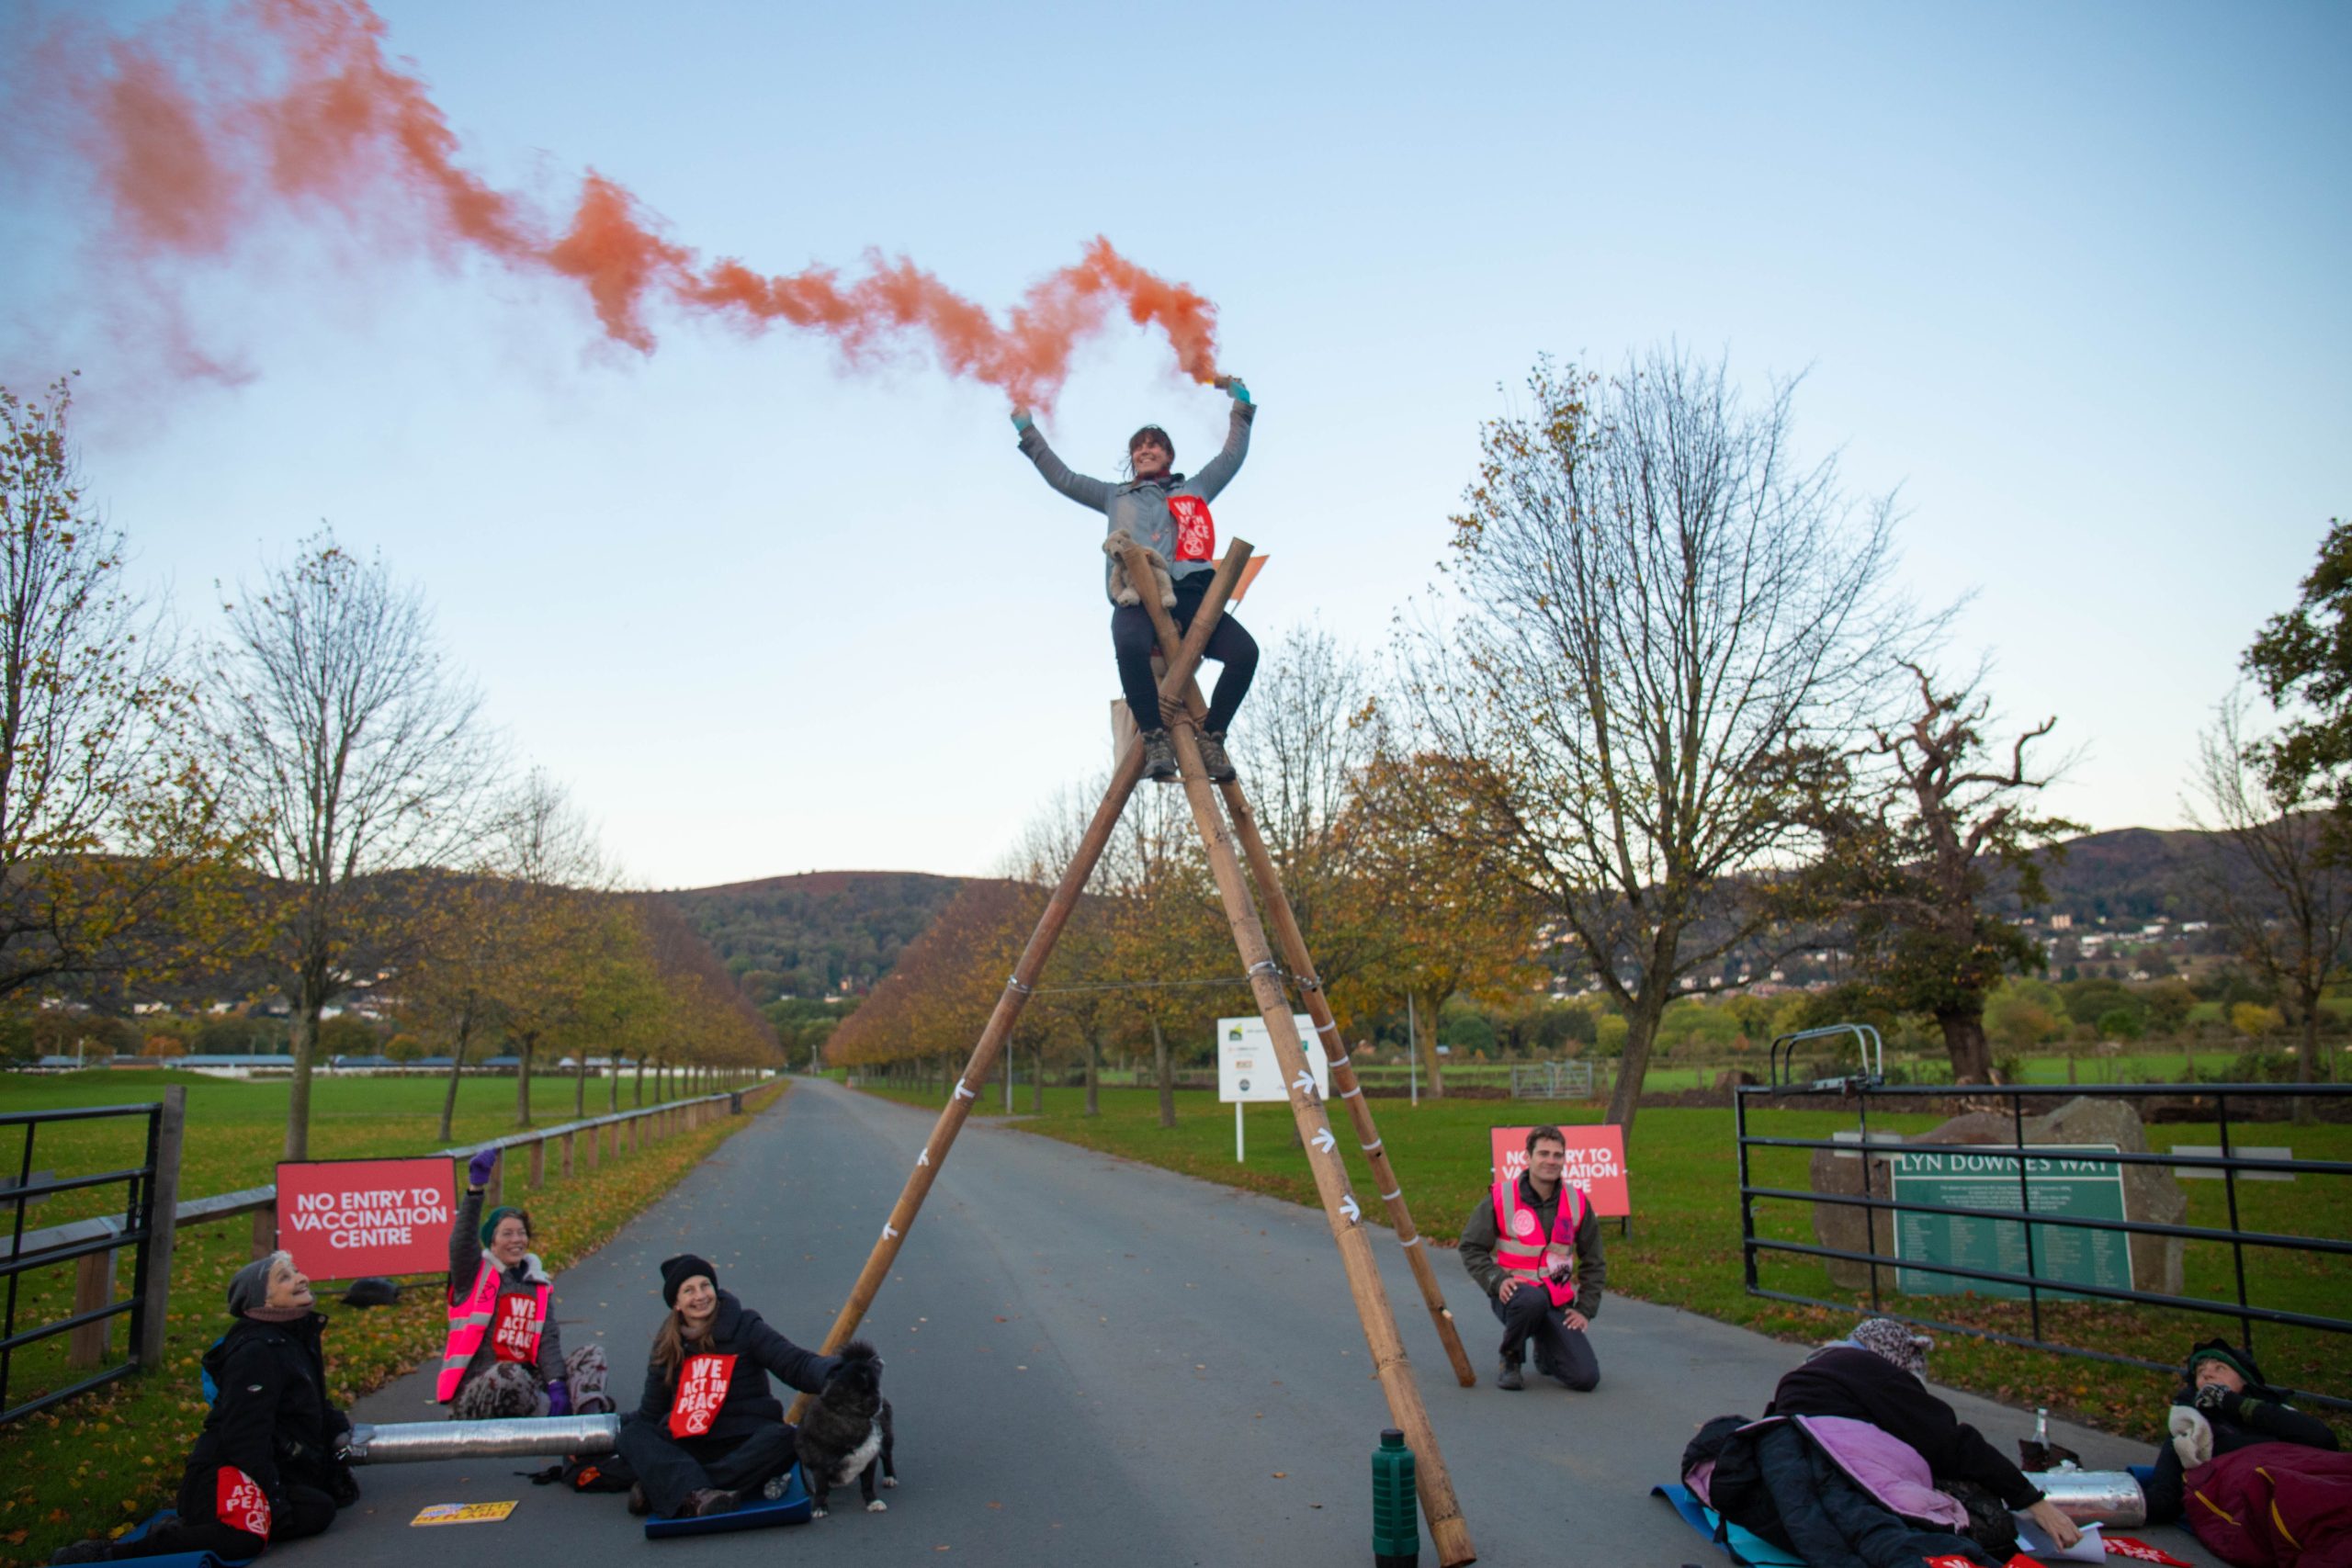 GALLERY | Extinction Rebellion Protesters block entrances at the Three Counties Showground in Malvern